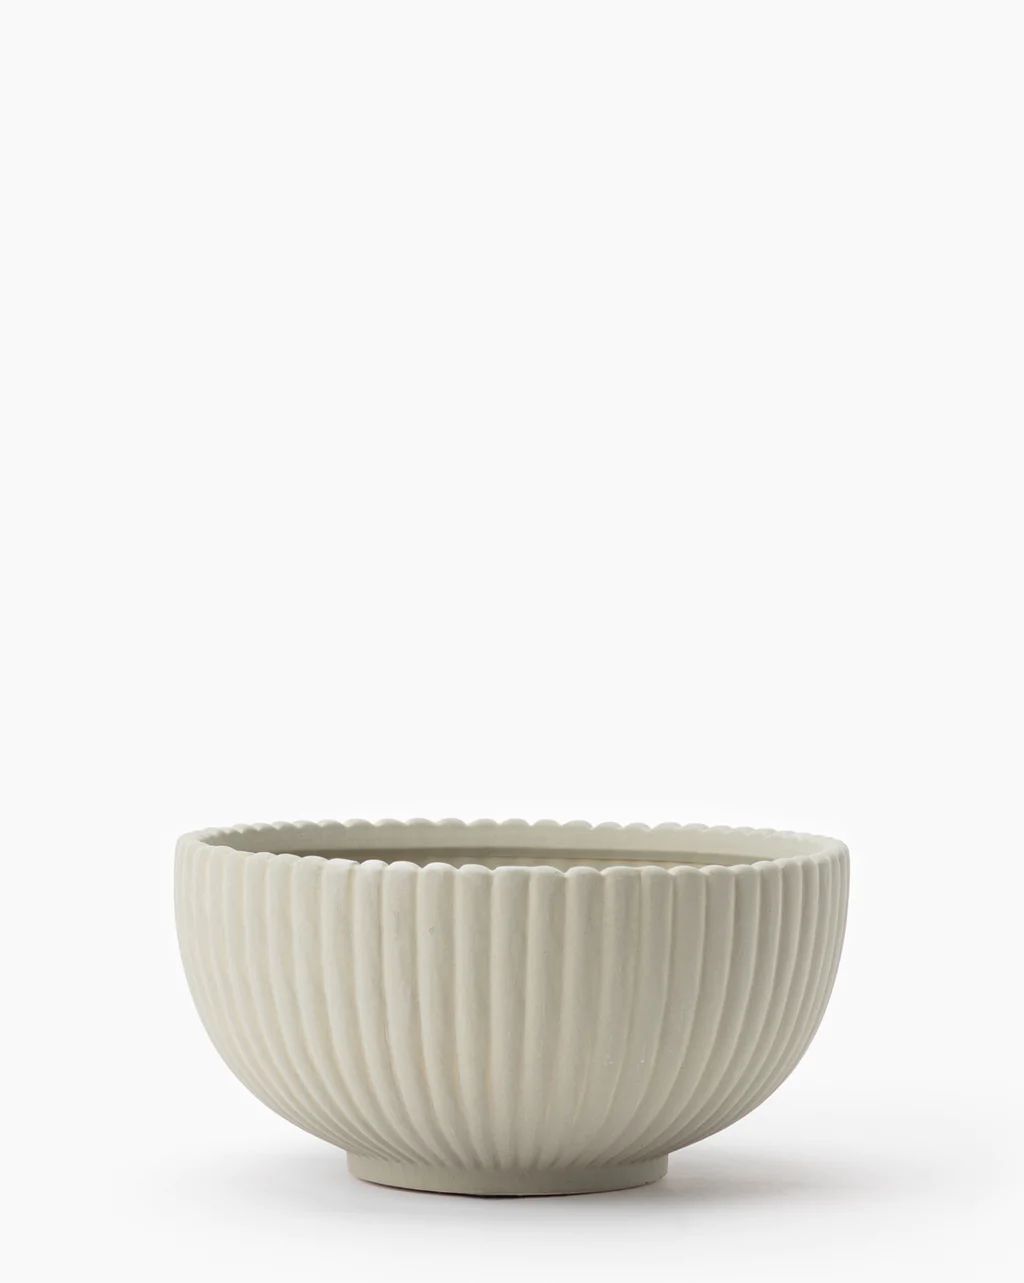 Reeded Bowl | McGee & Co.